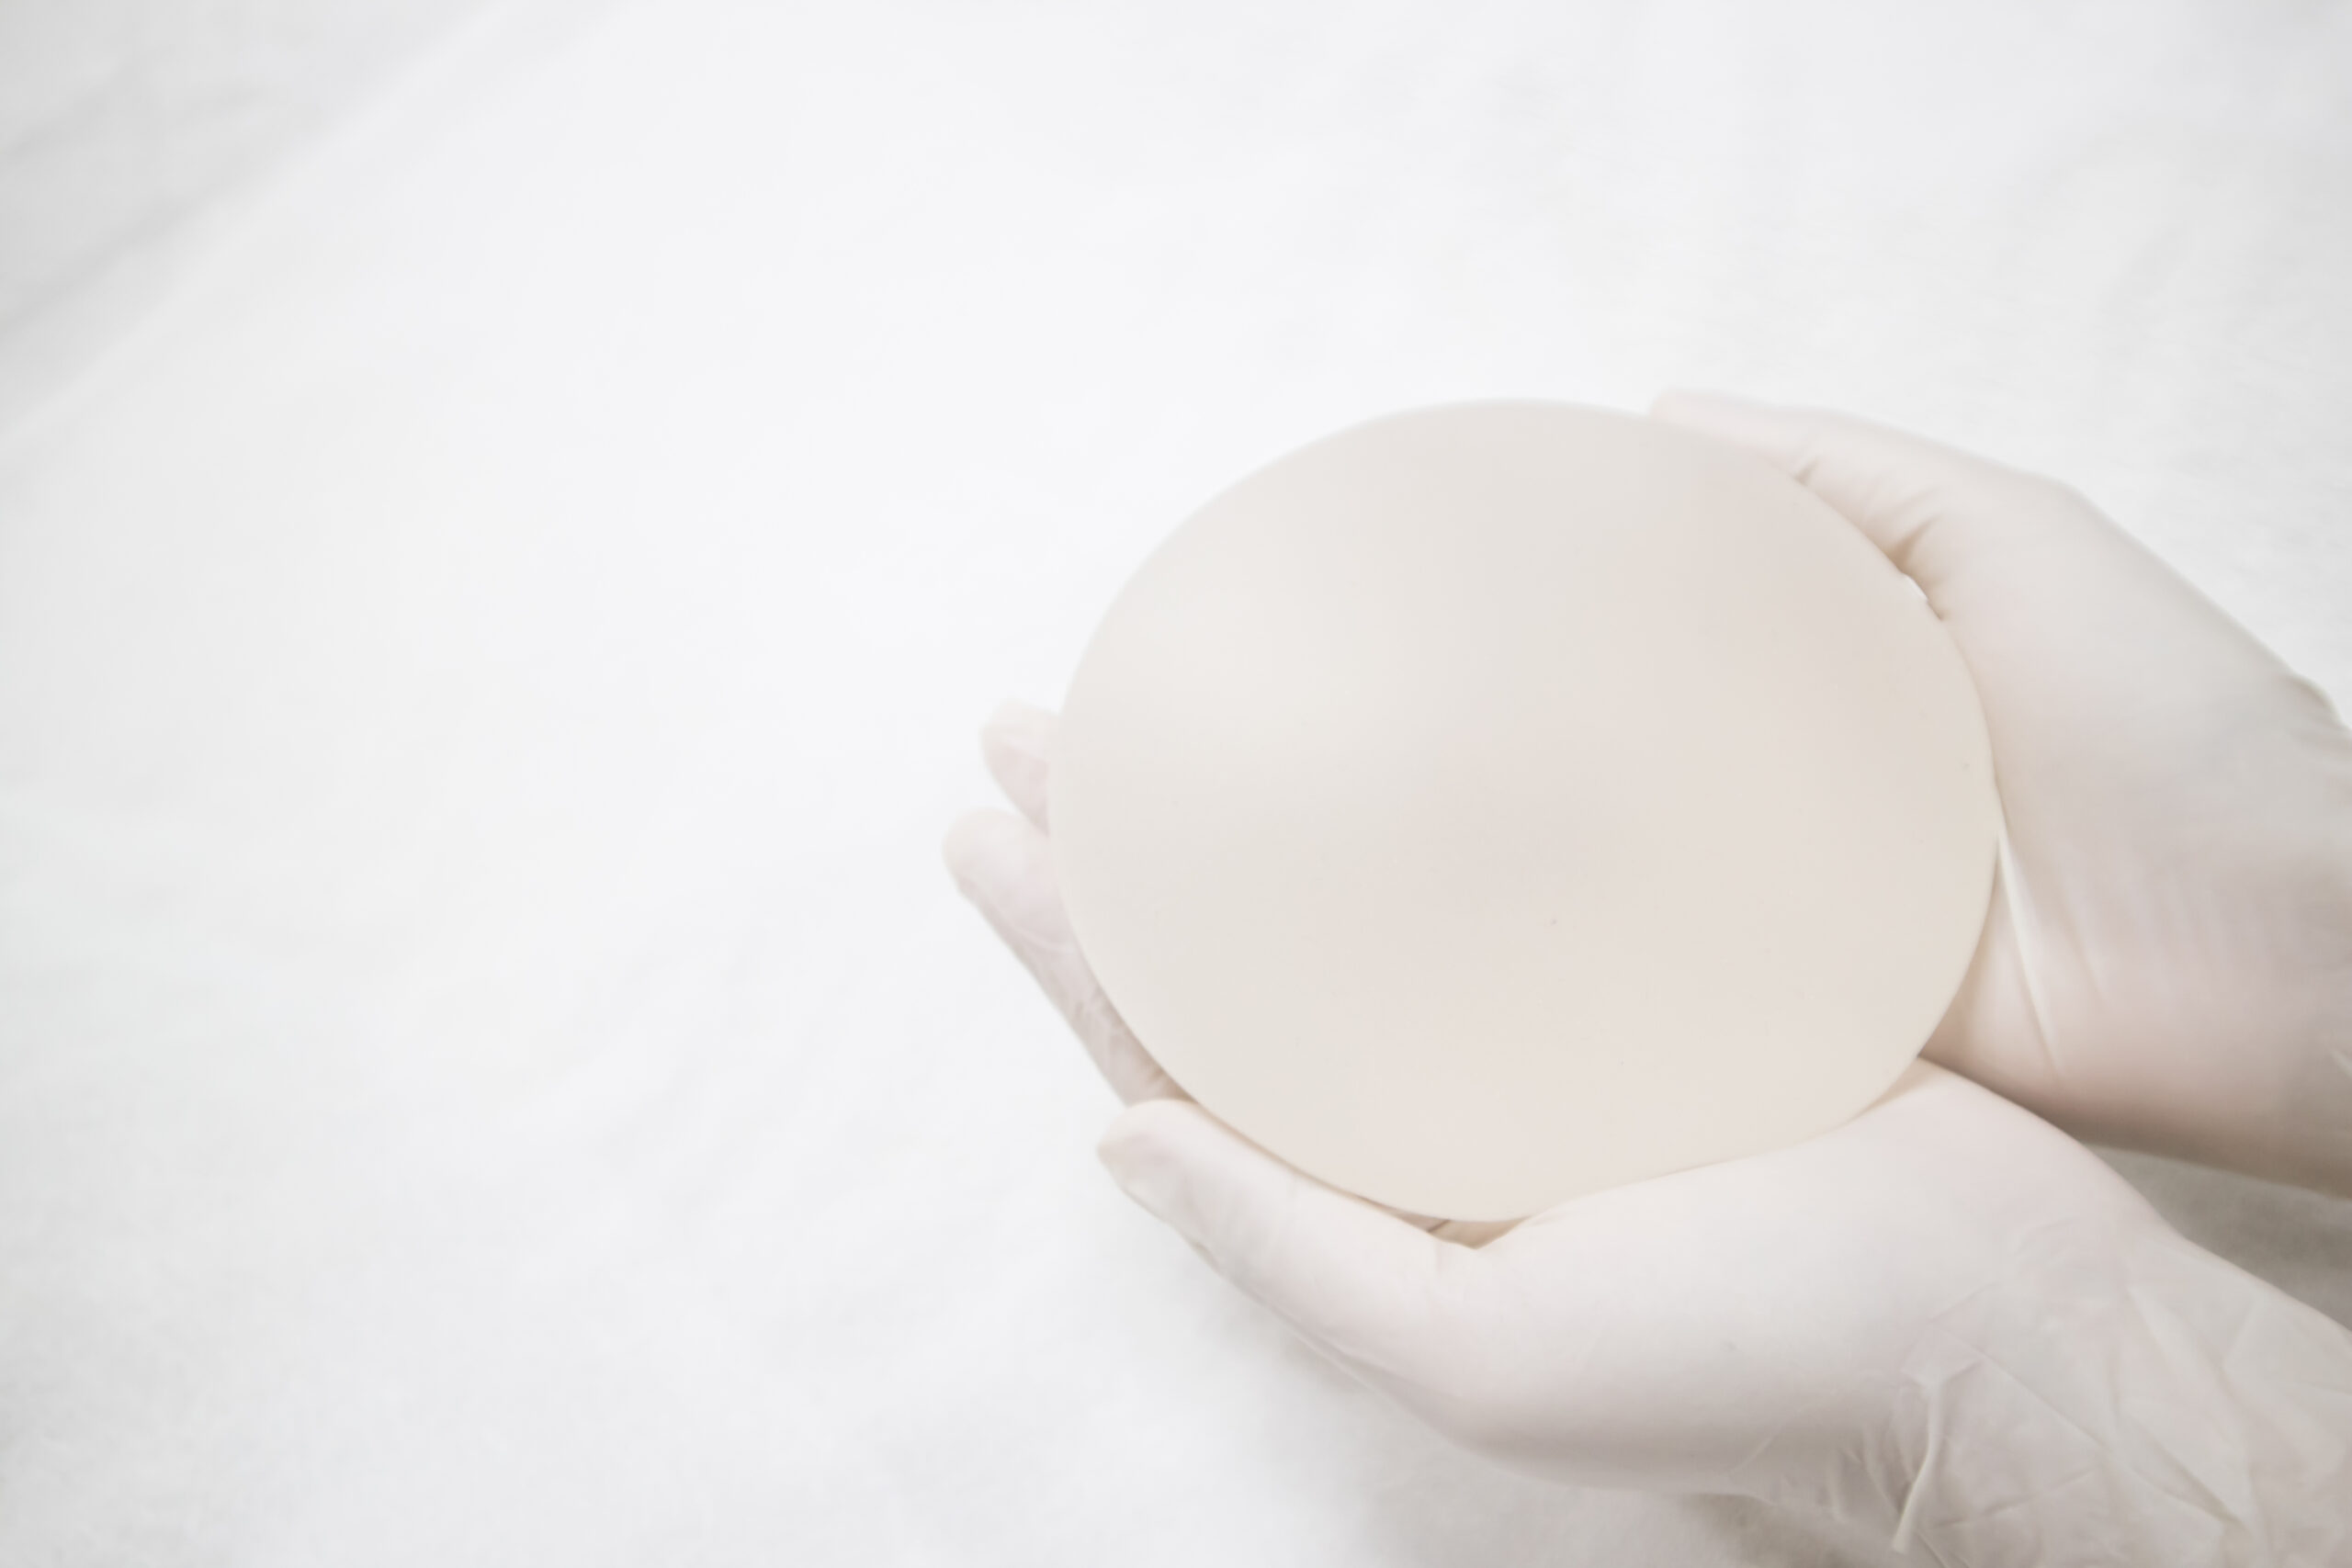 BREAST IMPLANT EXCHANGE implant removal breast augmentation BREAST IMPLANT EXCHANGE london clinic (+/- CAPSULECTOMY)